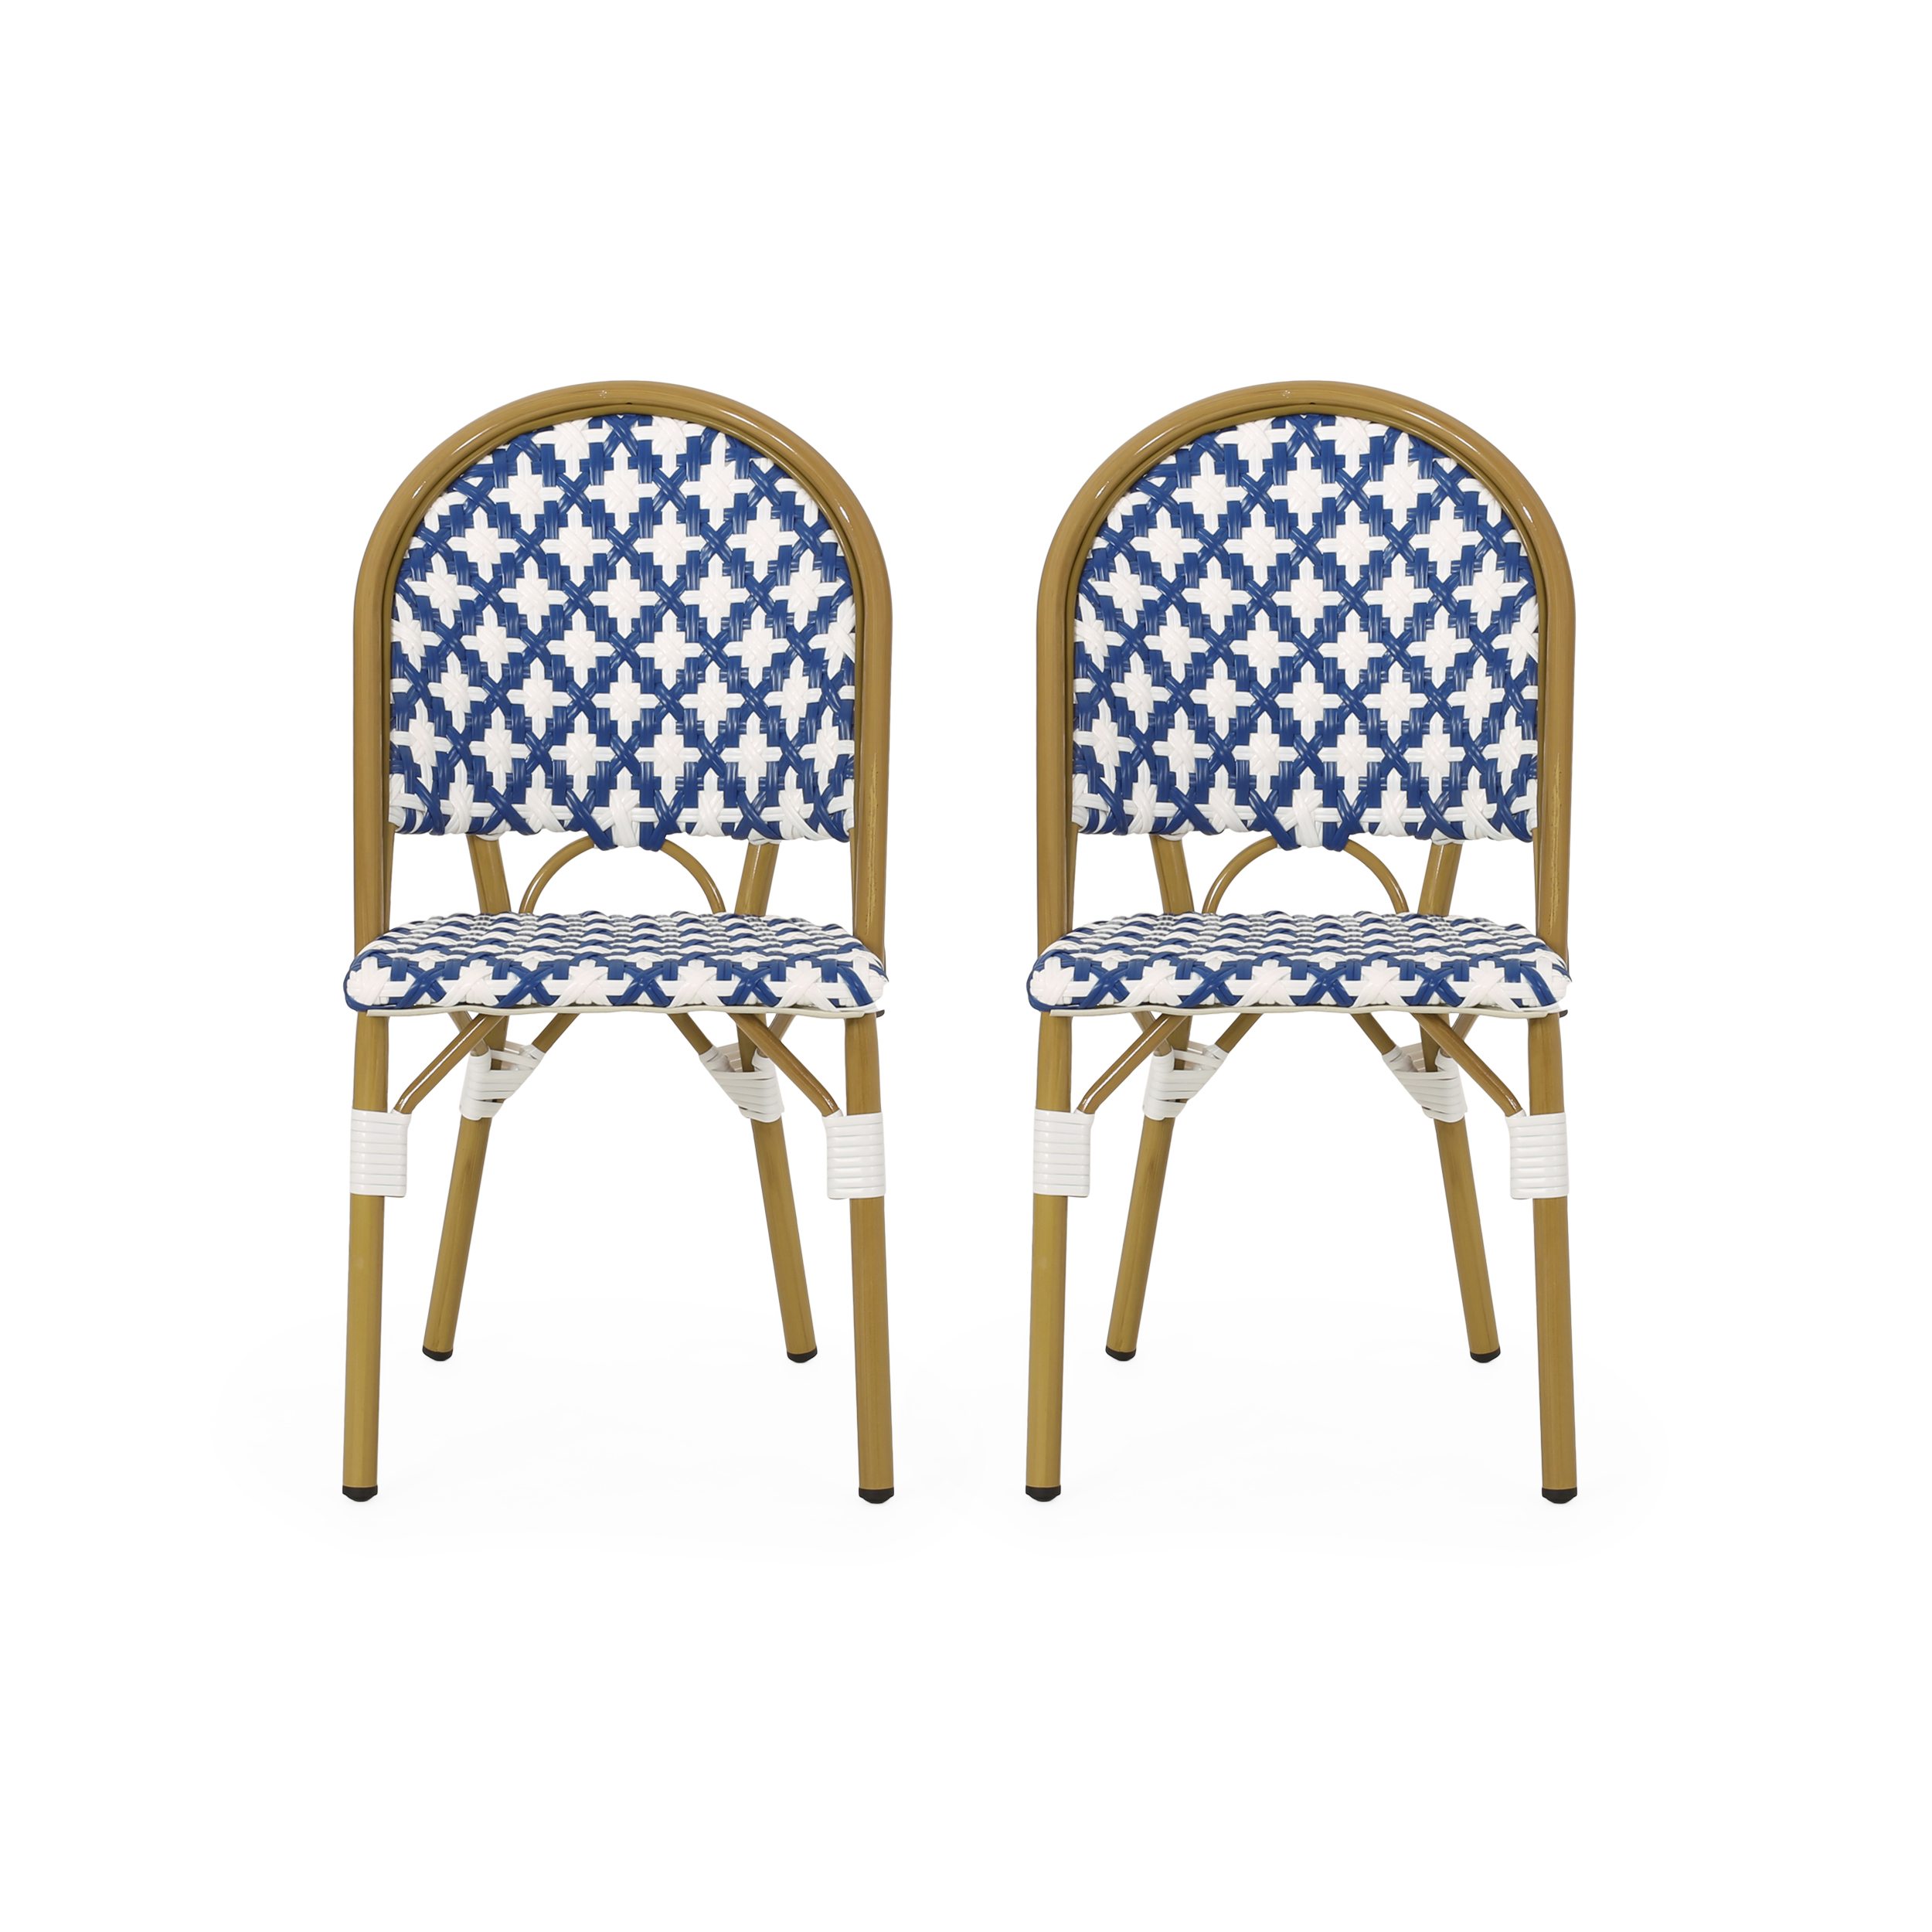 Brandon Outdoor French Bistro Chair, Set of 2, Blue, White, Bamboo Finish - image 1 of 8